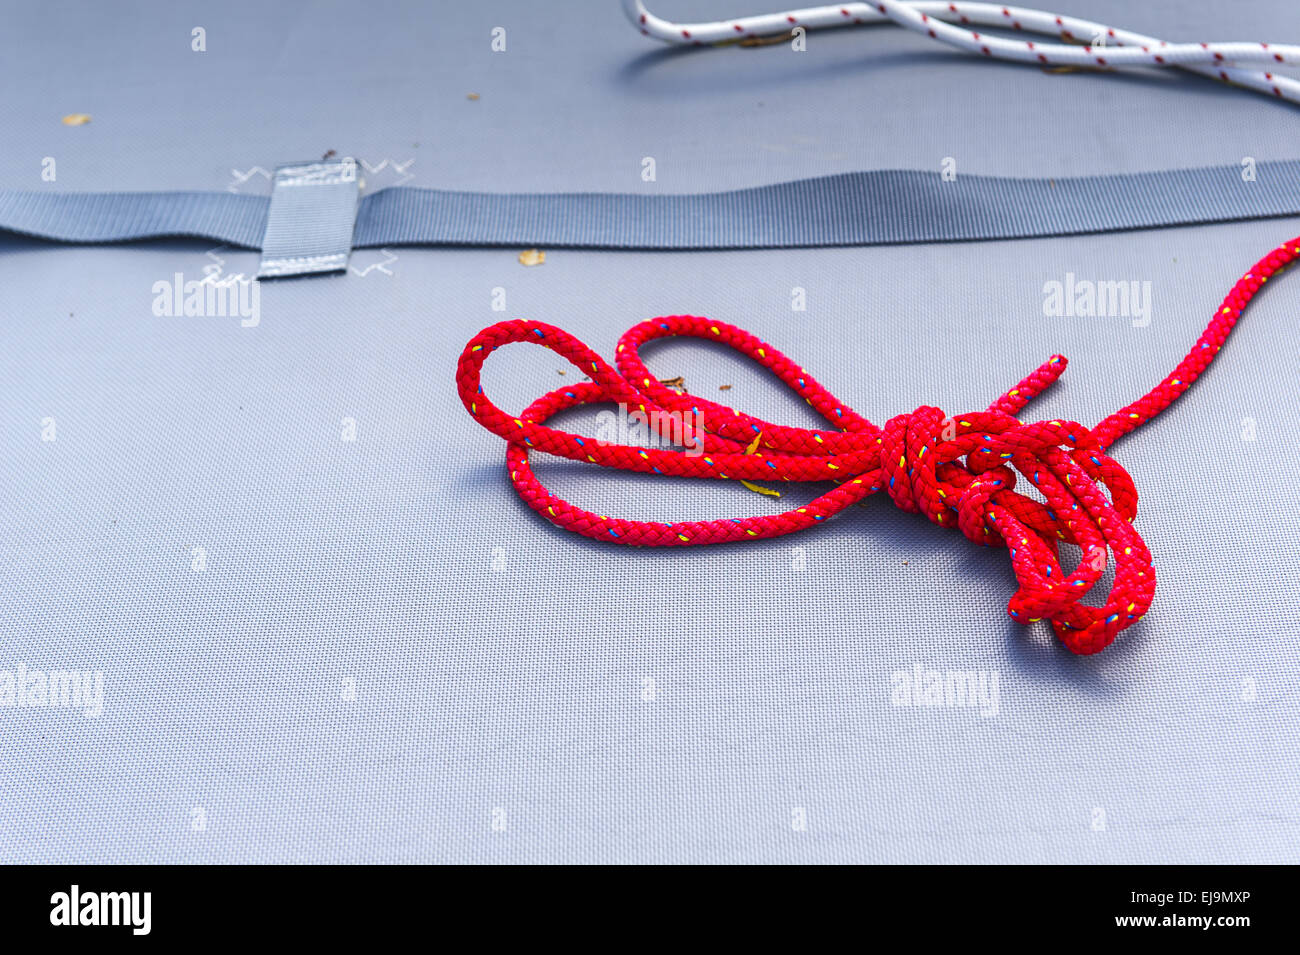 Red rope on a boat Stock Photo